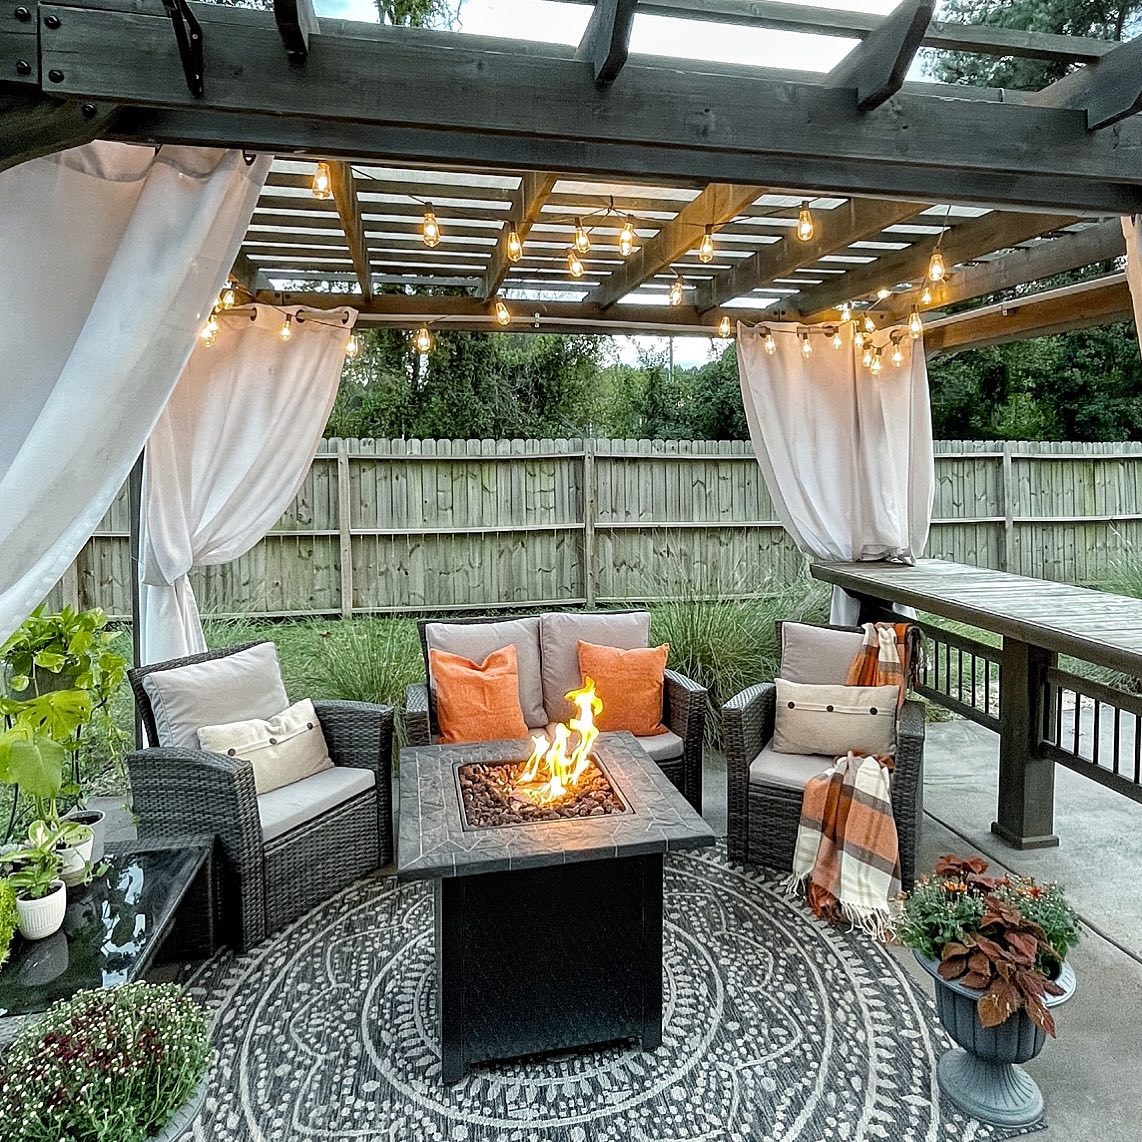 A backyard seating area with a fire pit in the center, beneath a pergola with curtains tied to its corners. Photo by Instagram user @shiplapshanty.